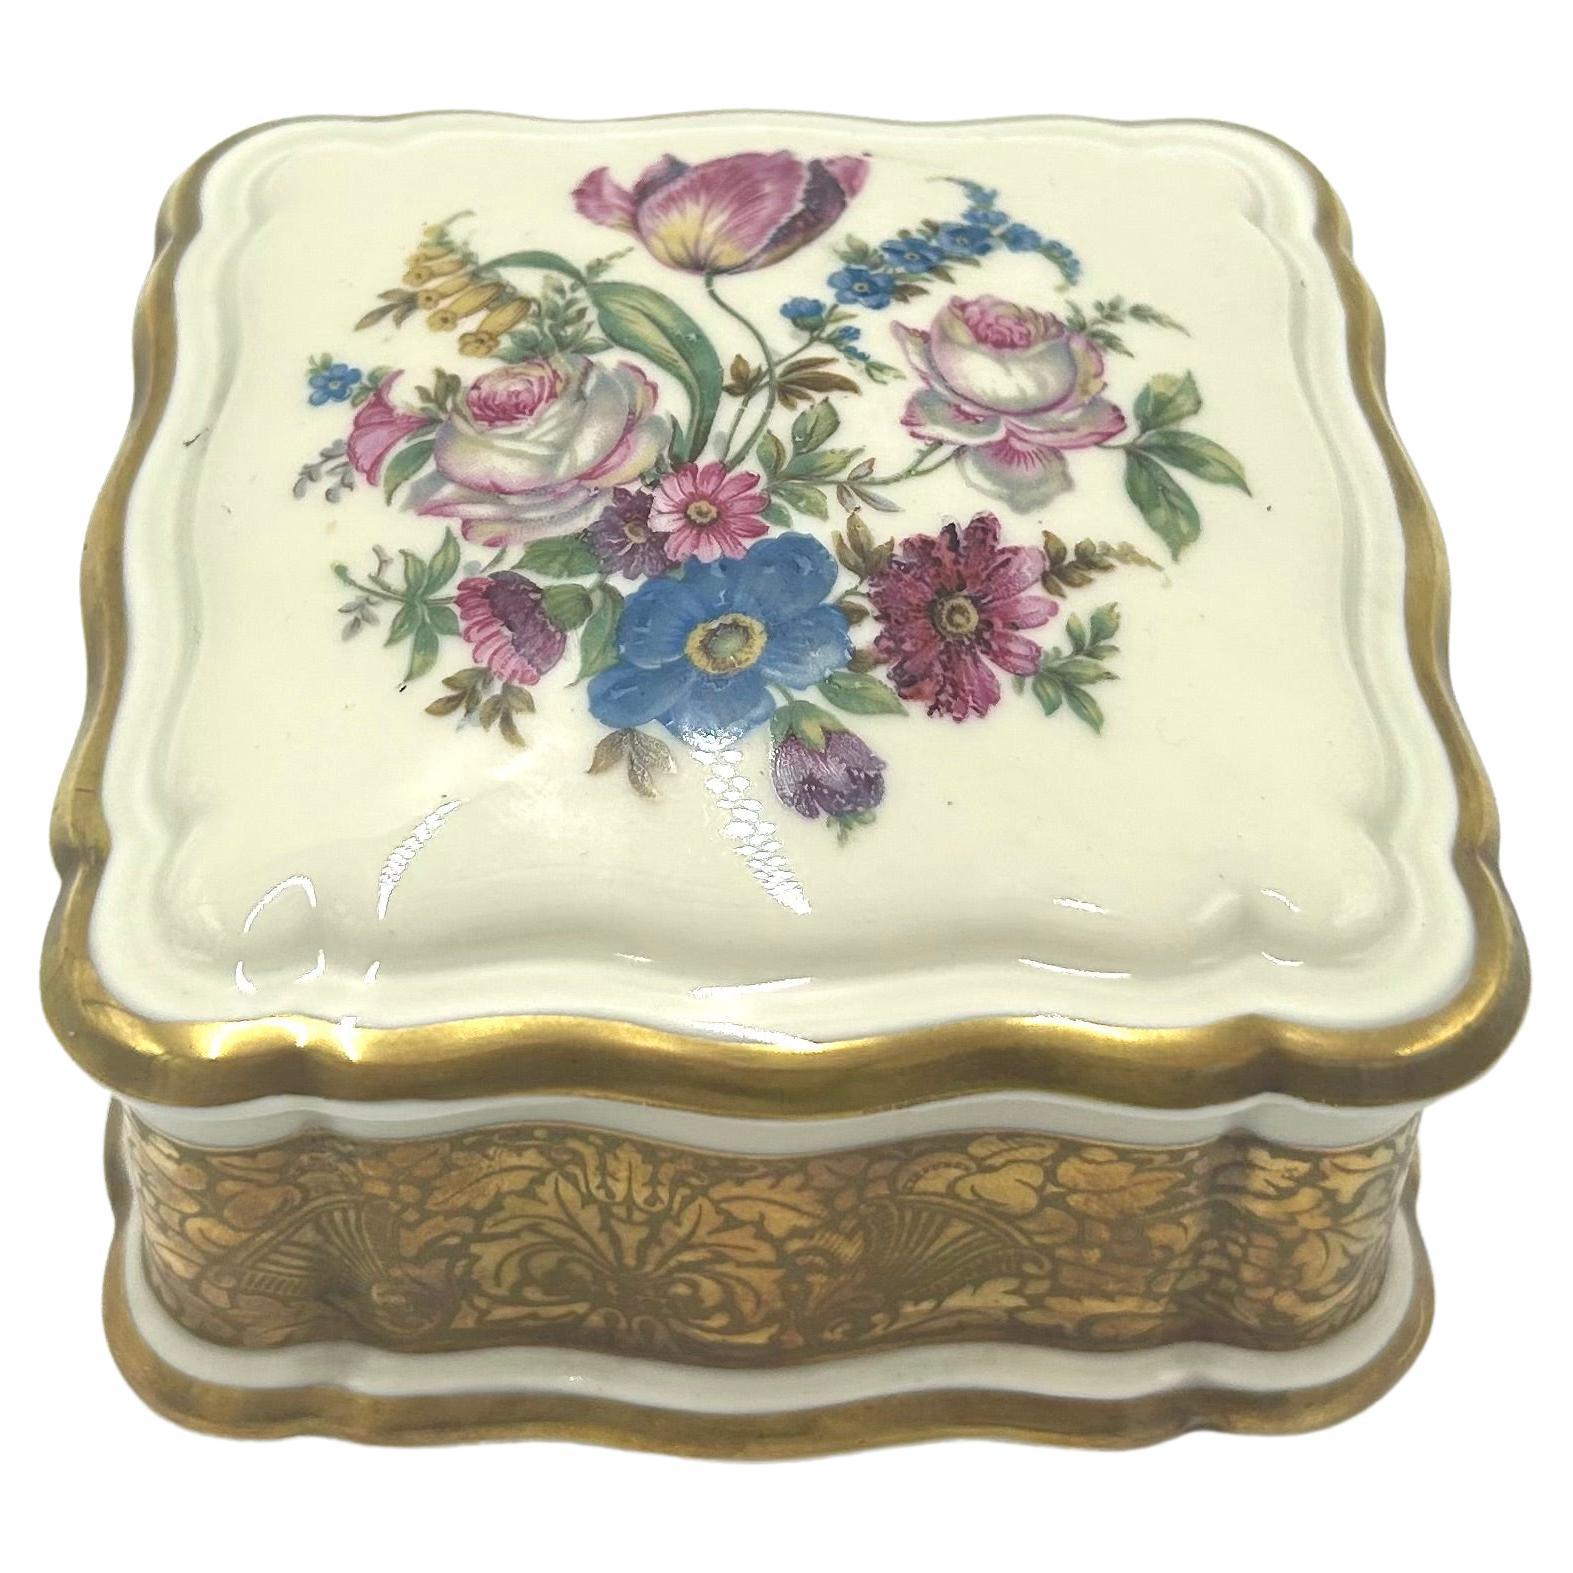 Porcelain Casket Jewellery Box, Rosenthal Chippendale, Germany, 1943-1948